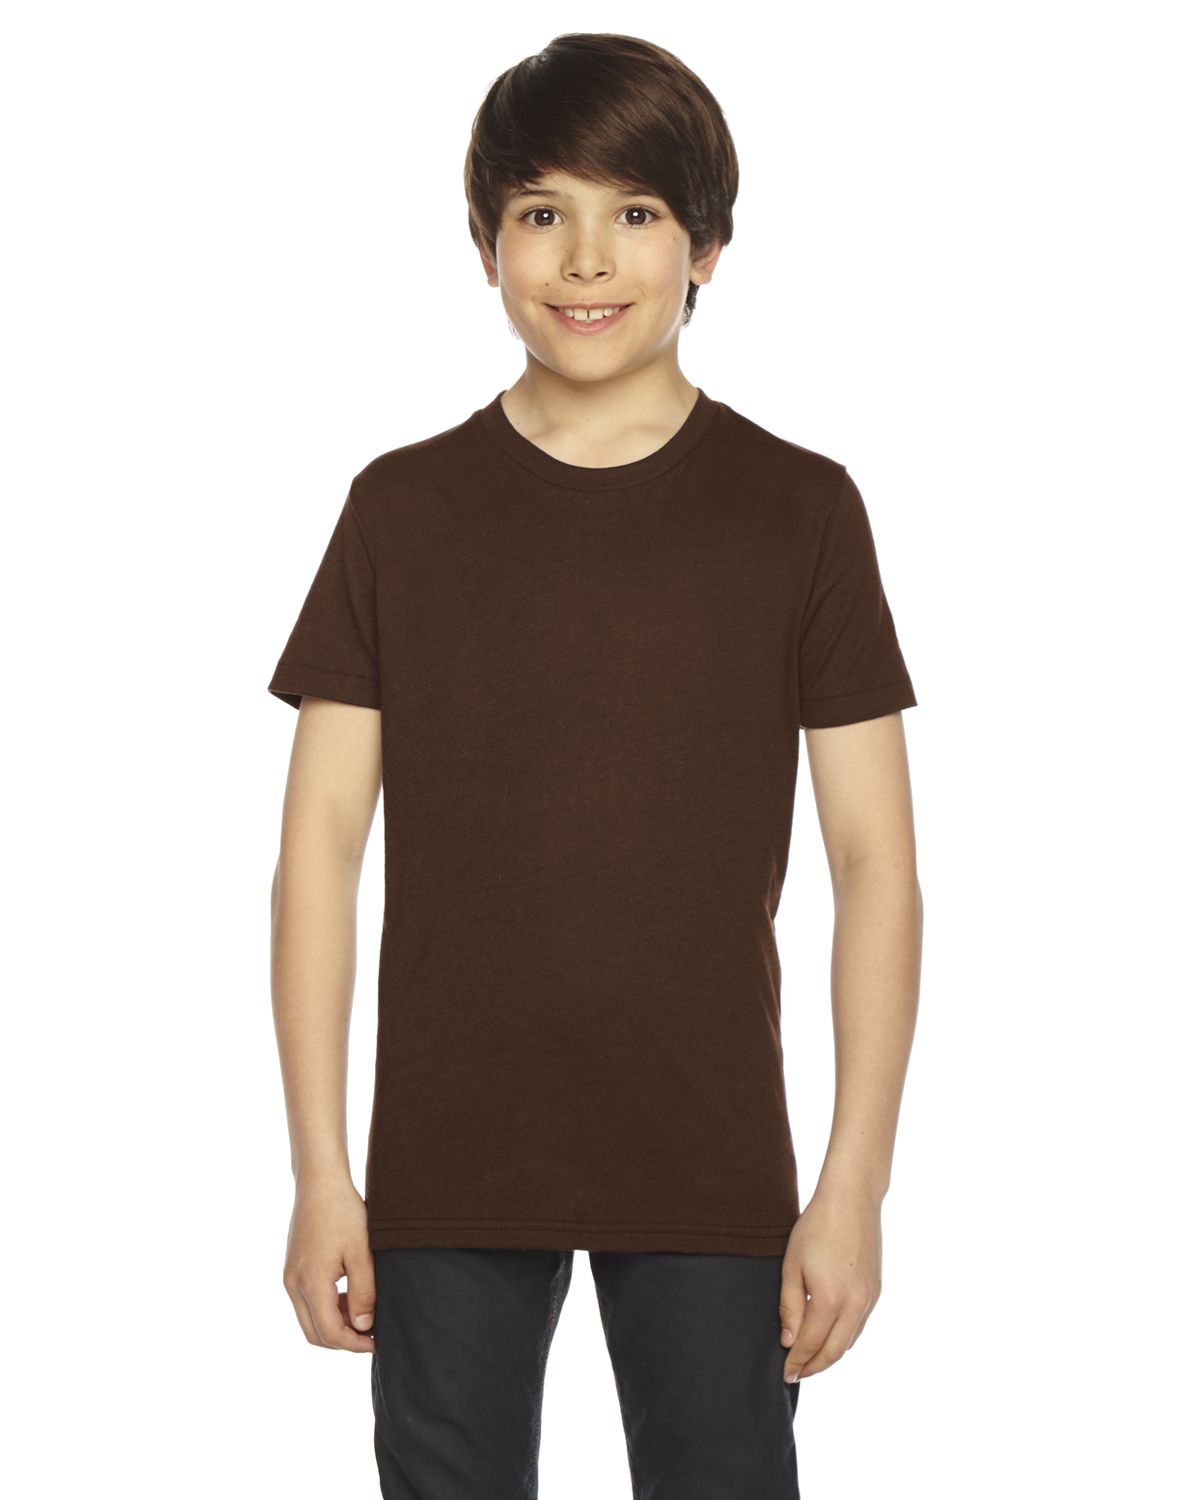 American Apparel Youth Poly-cotton Short-sleeve Crewneck